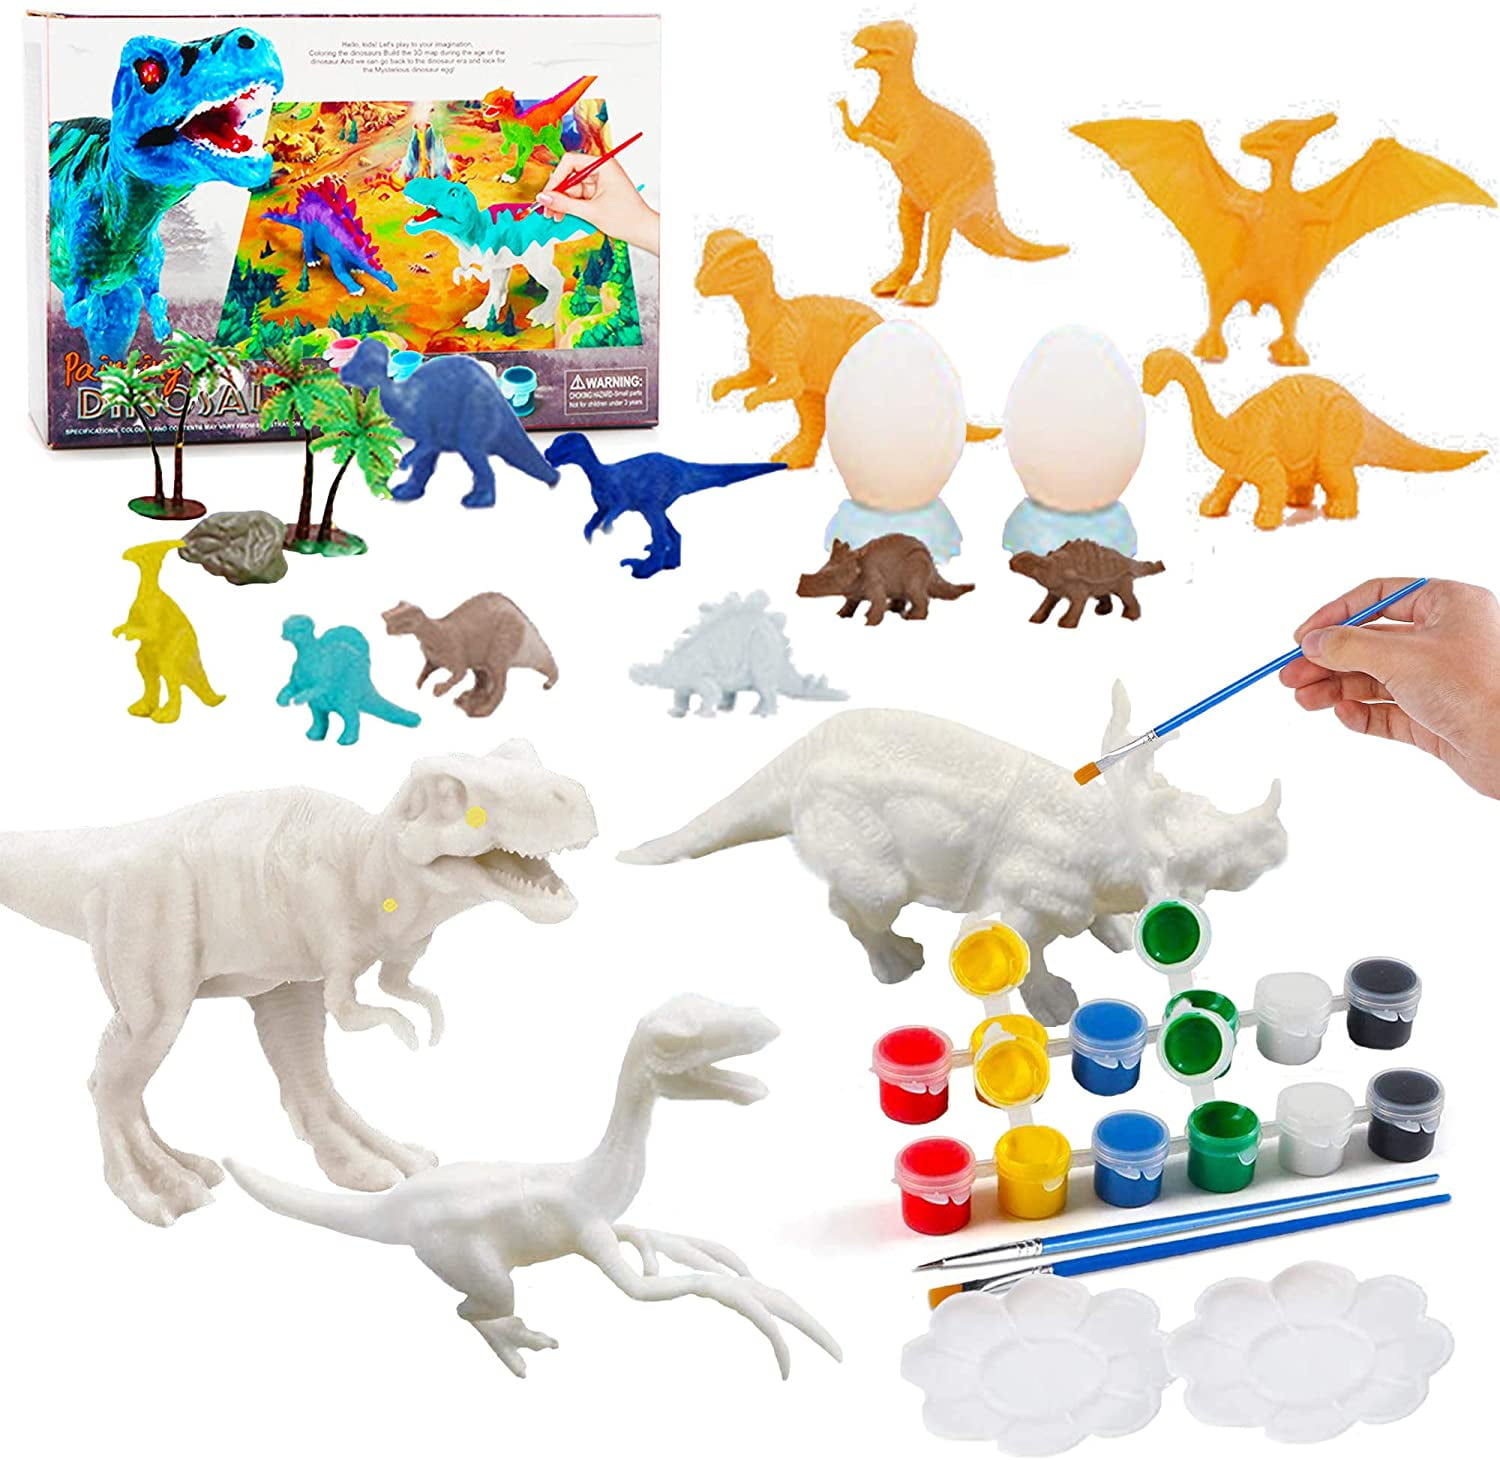 HOLICOLOR Arts and Crafts for Kids 4-8 Dinosaur Toys Painting Kit 8 Pull  Back Cars Set DIY Creative Bitrhday Gift for Boys Girls Toddlers Ages 4 5 6  7